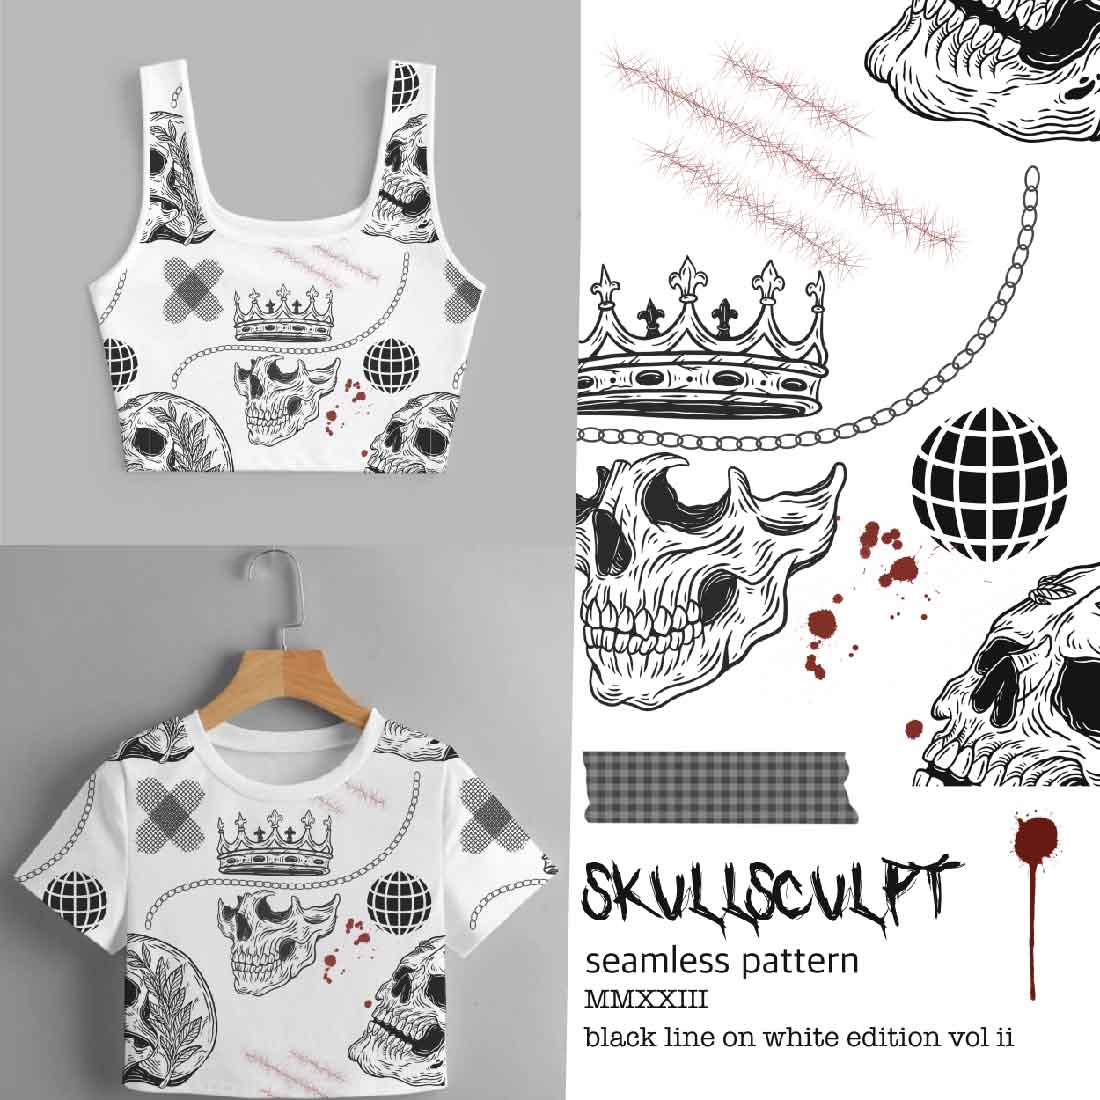 SkullSculpt New Edition in White: Premium Seamless Patterns for Stylish Woman's Apparel cover image.